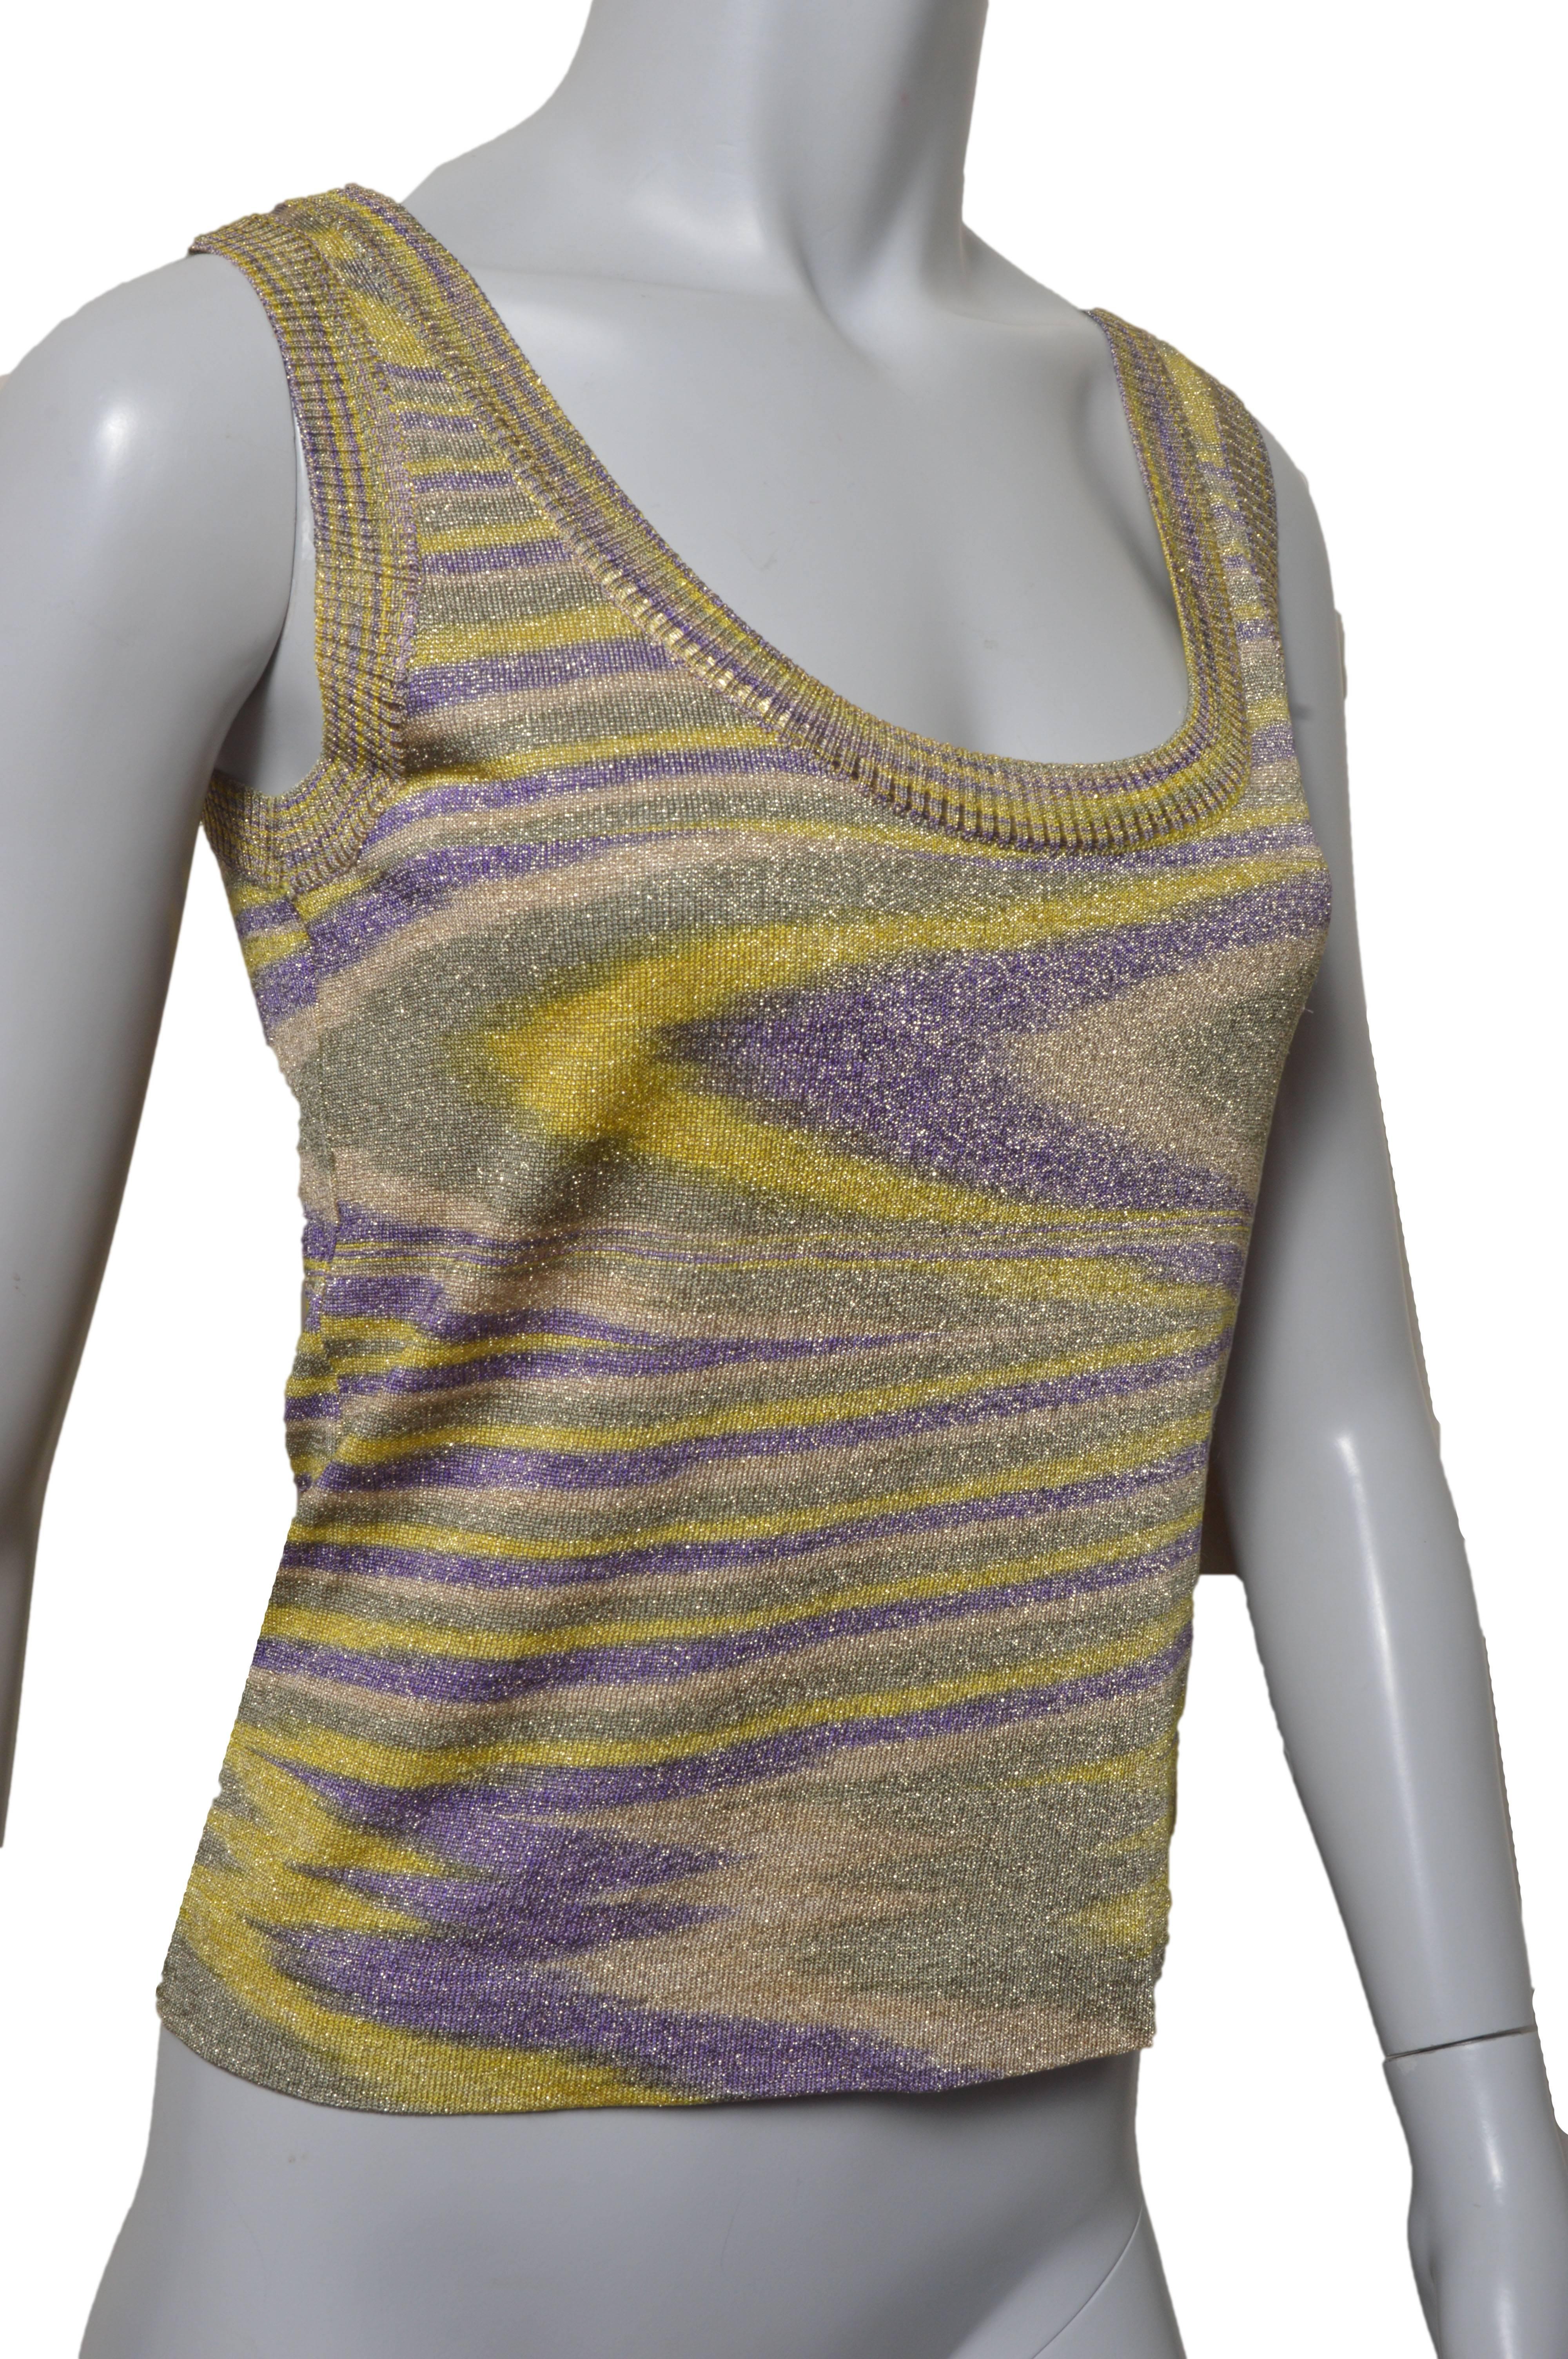 Lovely Missoni woven tank top.
Shades of yellow, purple and muted green 
with gold metallic thread woven throughout.
Scoop neck and back. 
No size tag found.